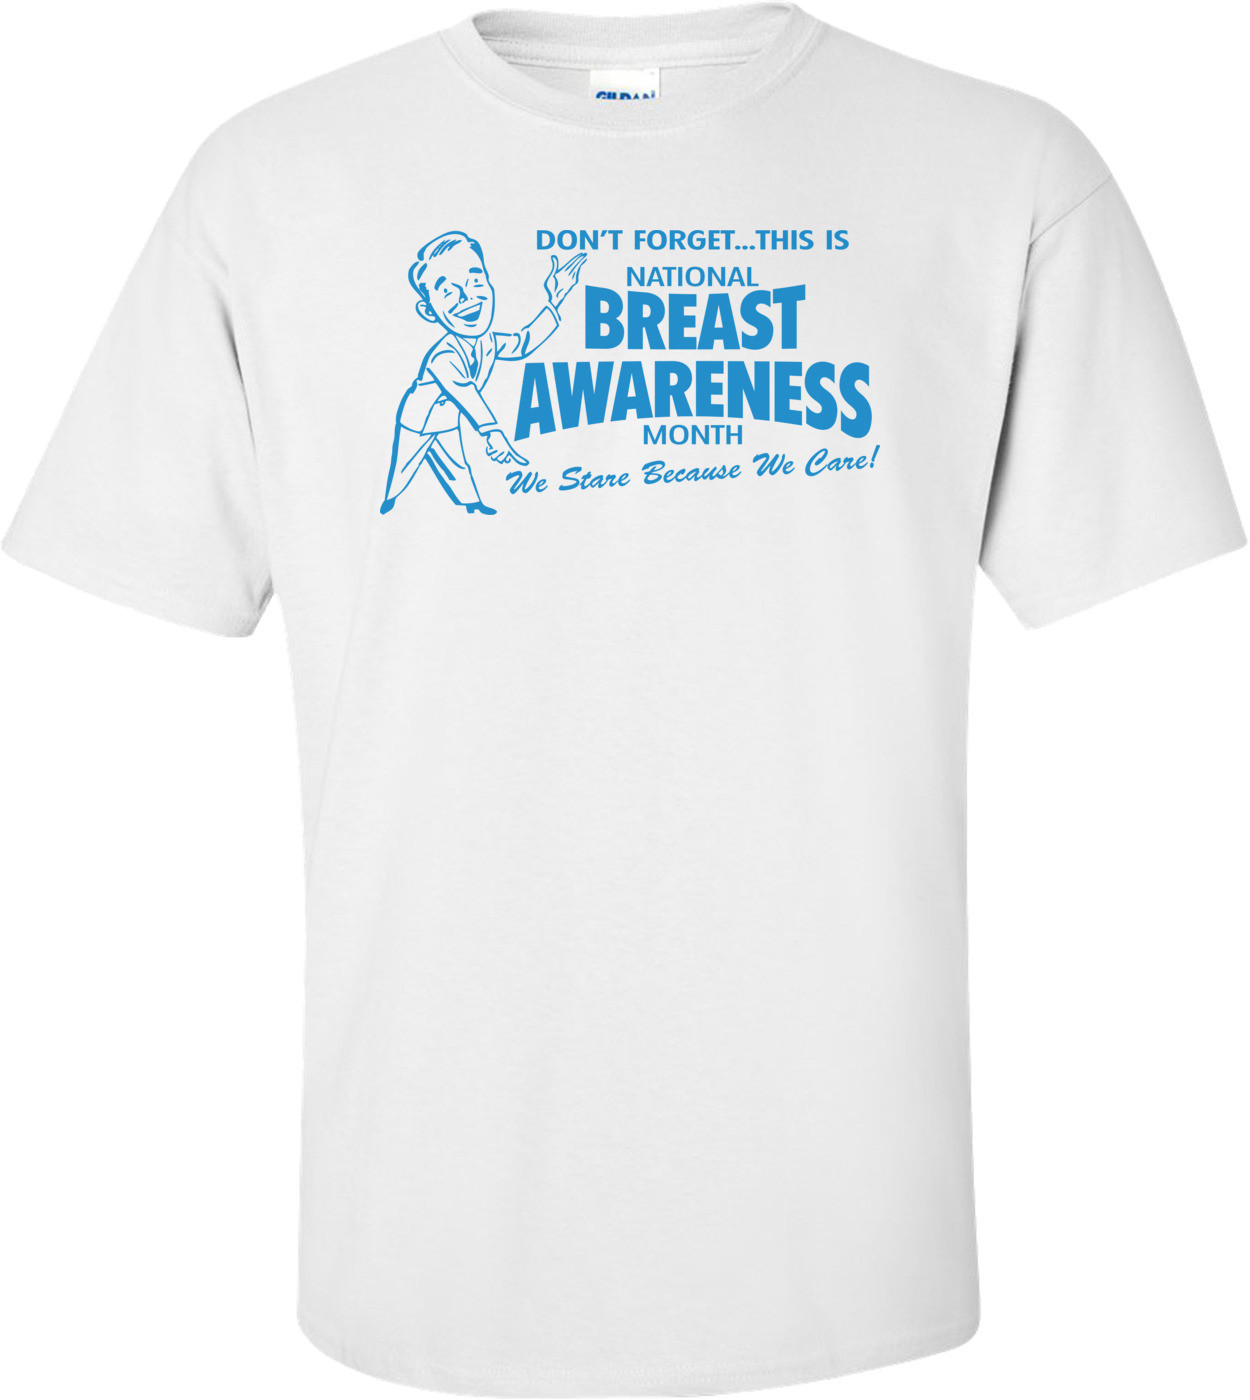 National Breast Awareness Month 